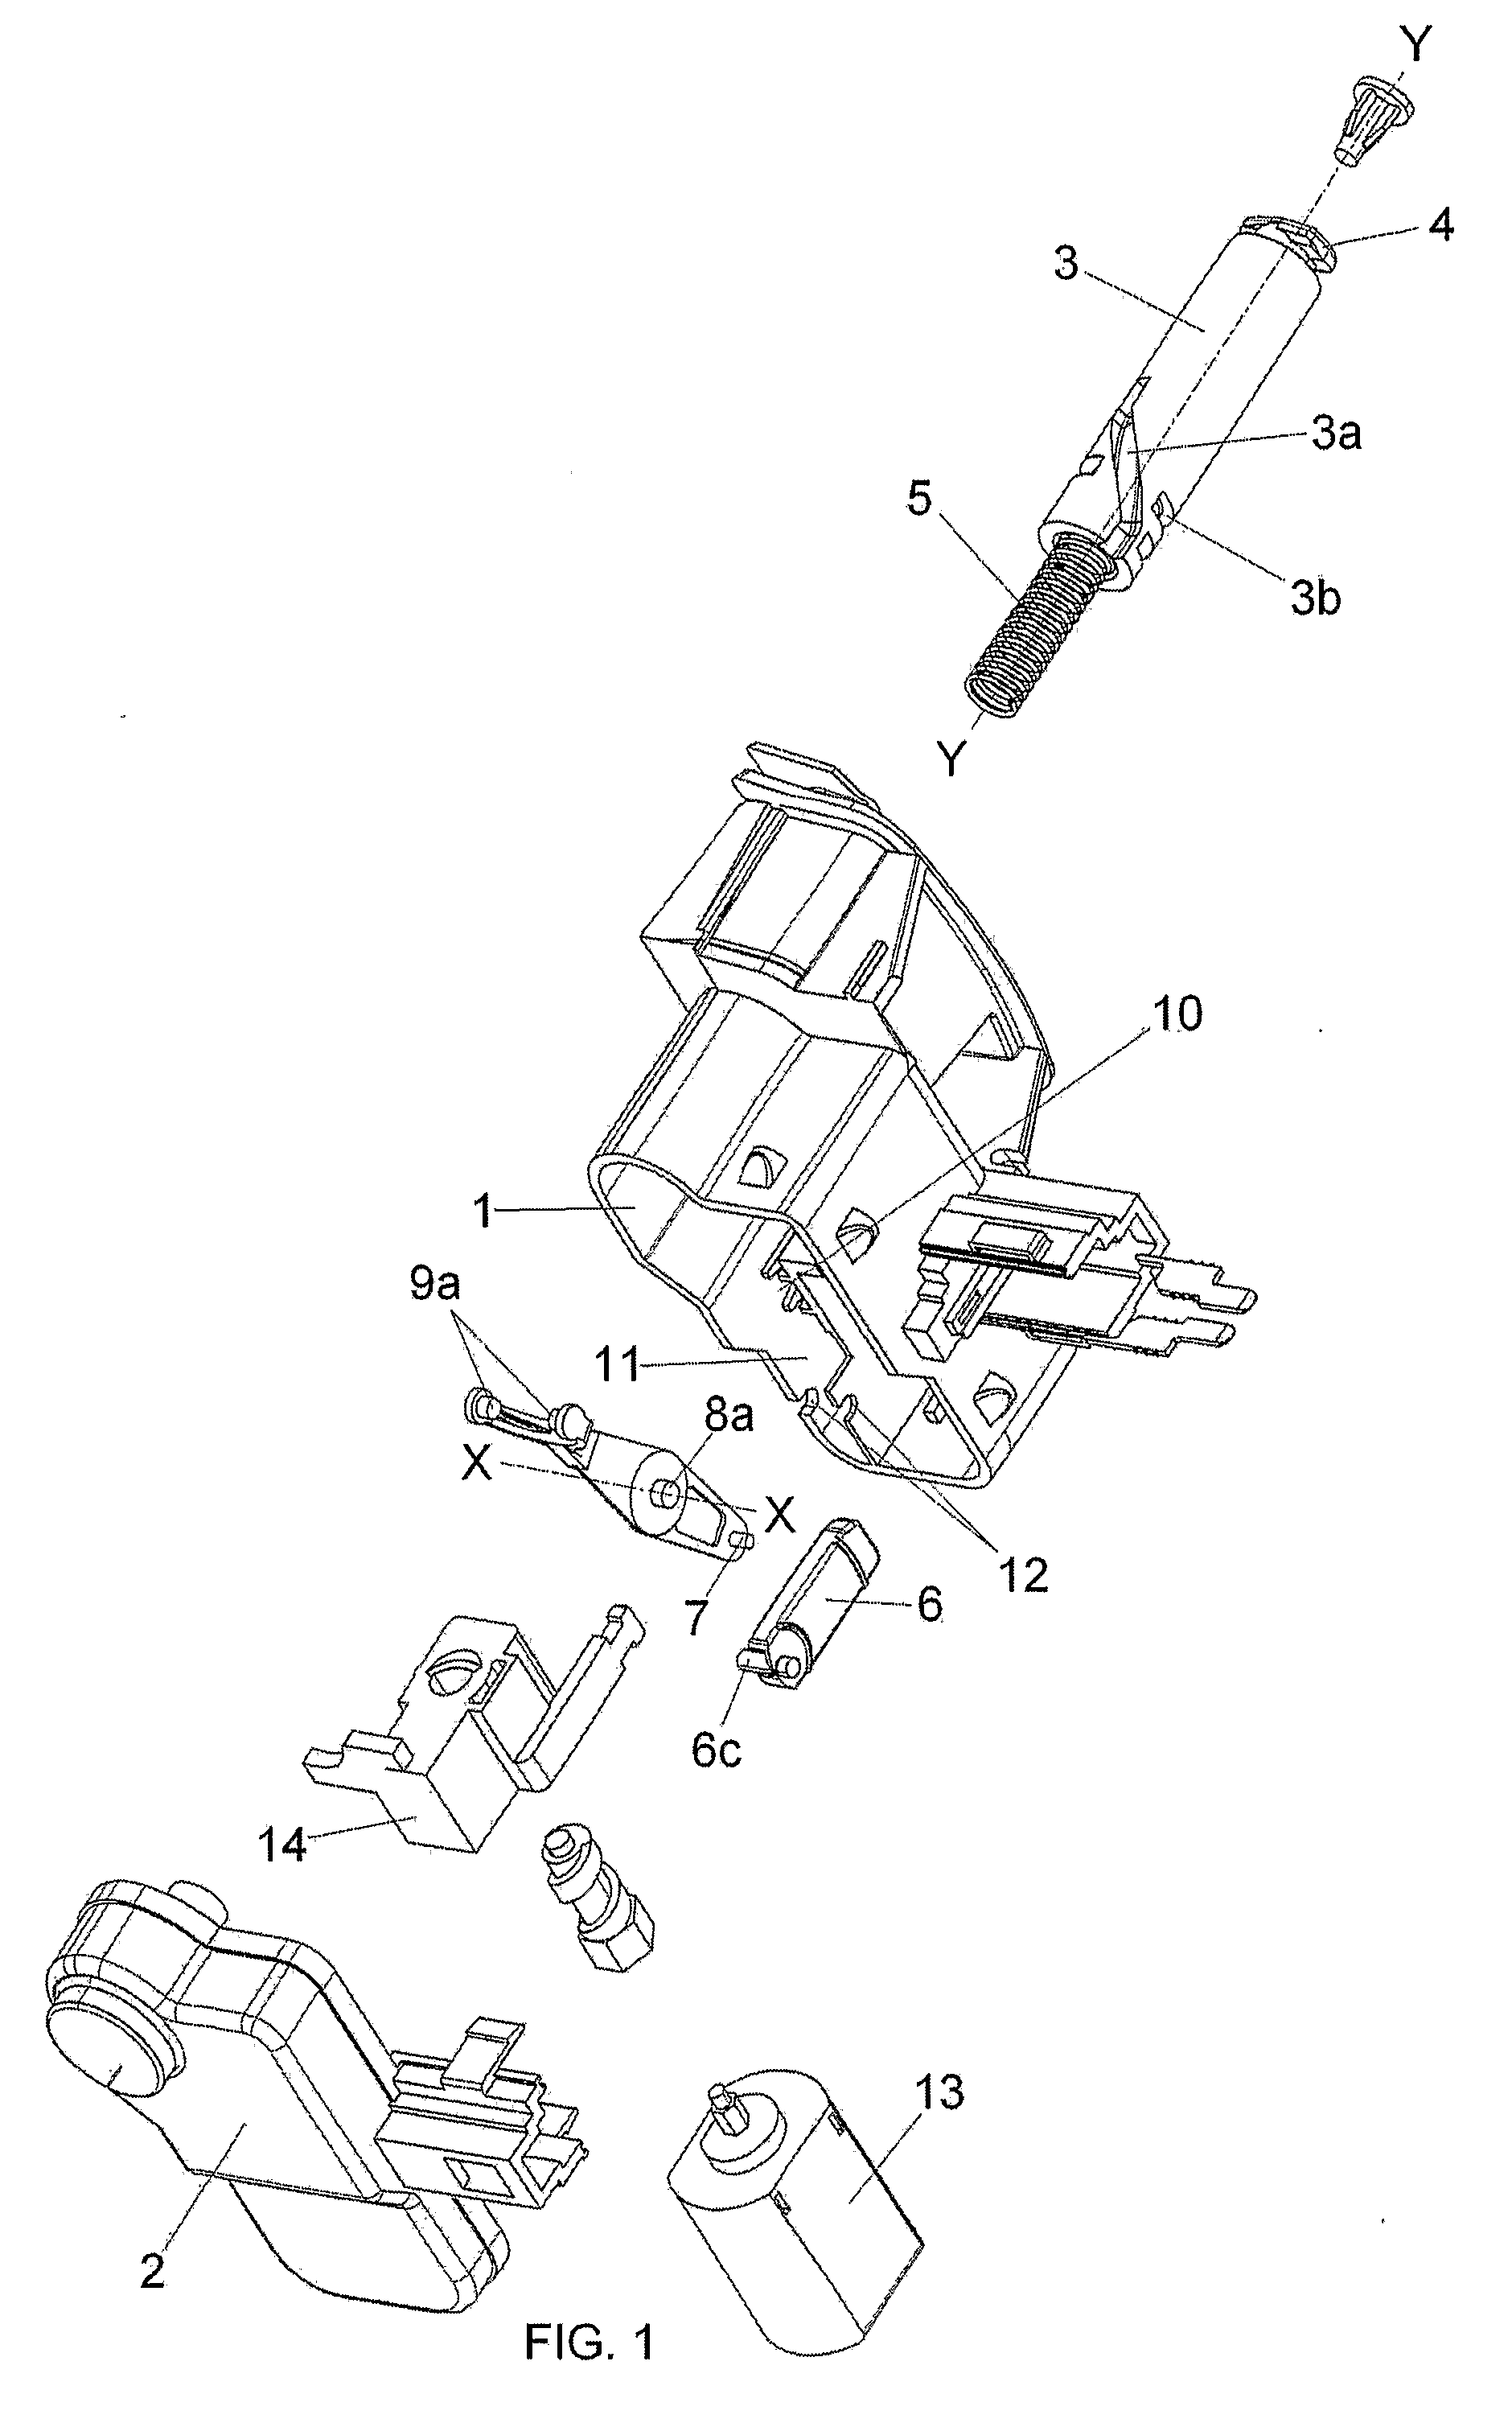 Opening and closing device for lids